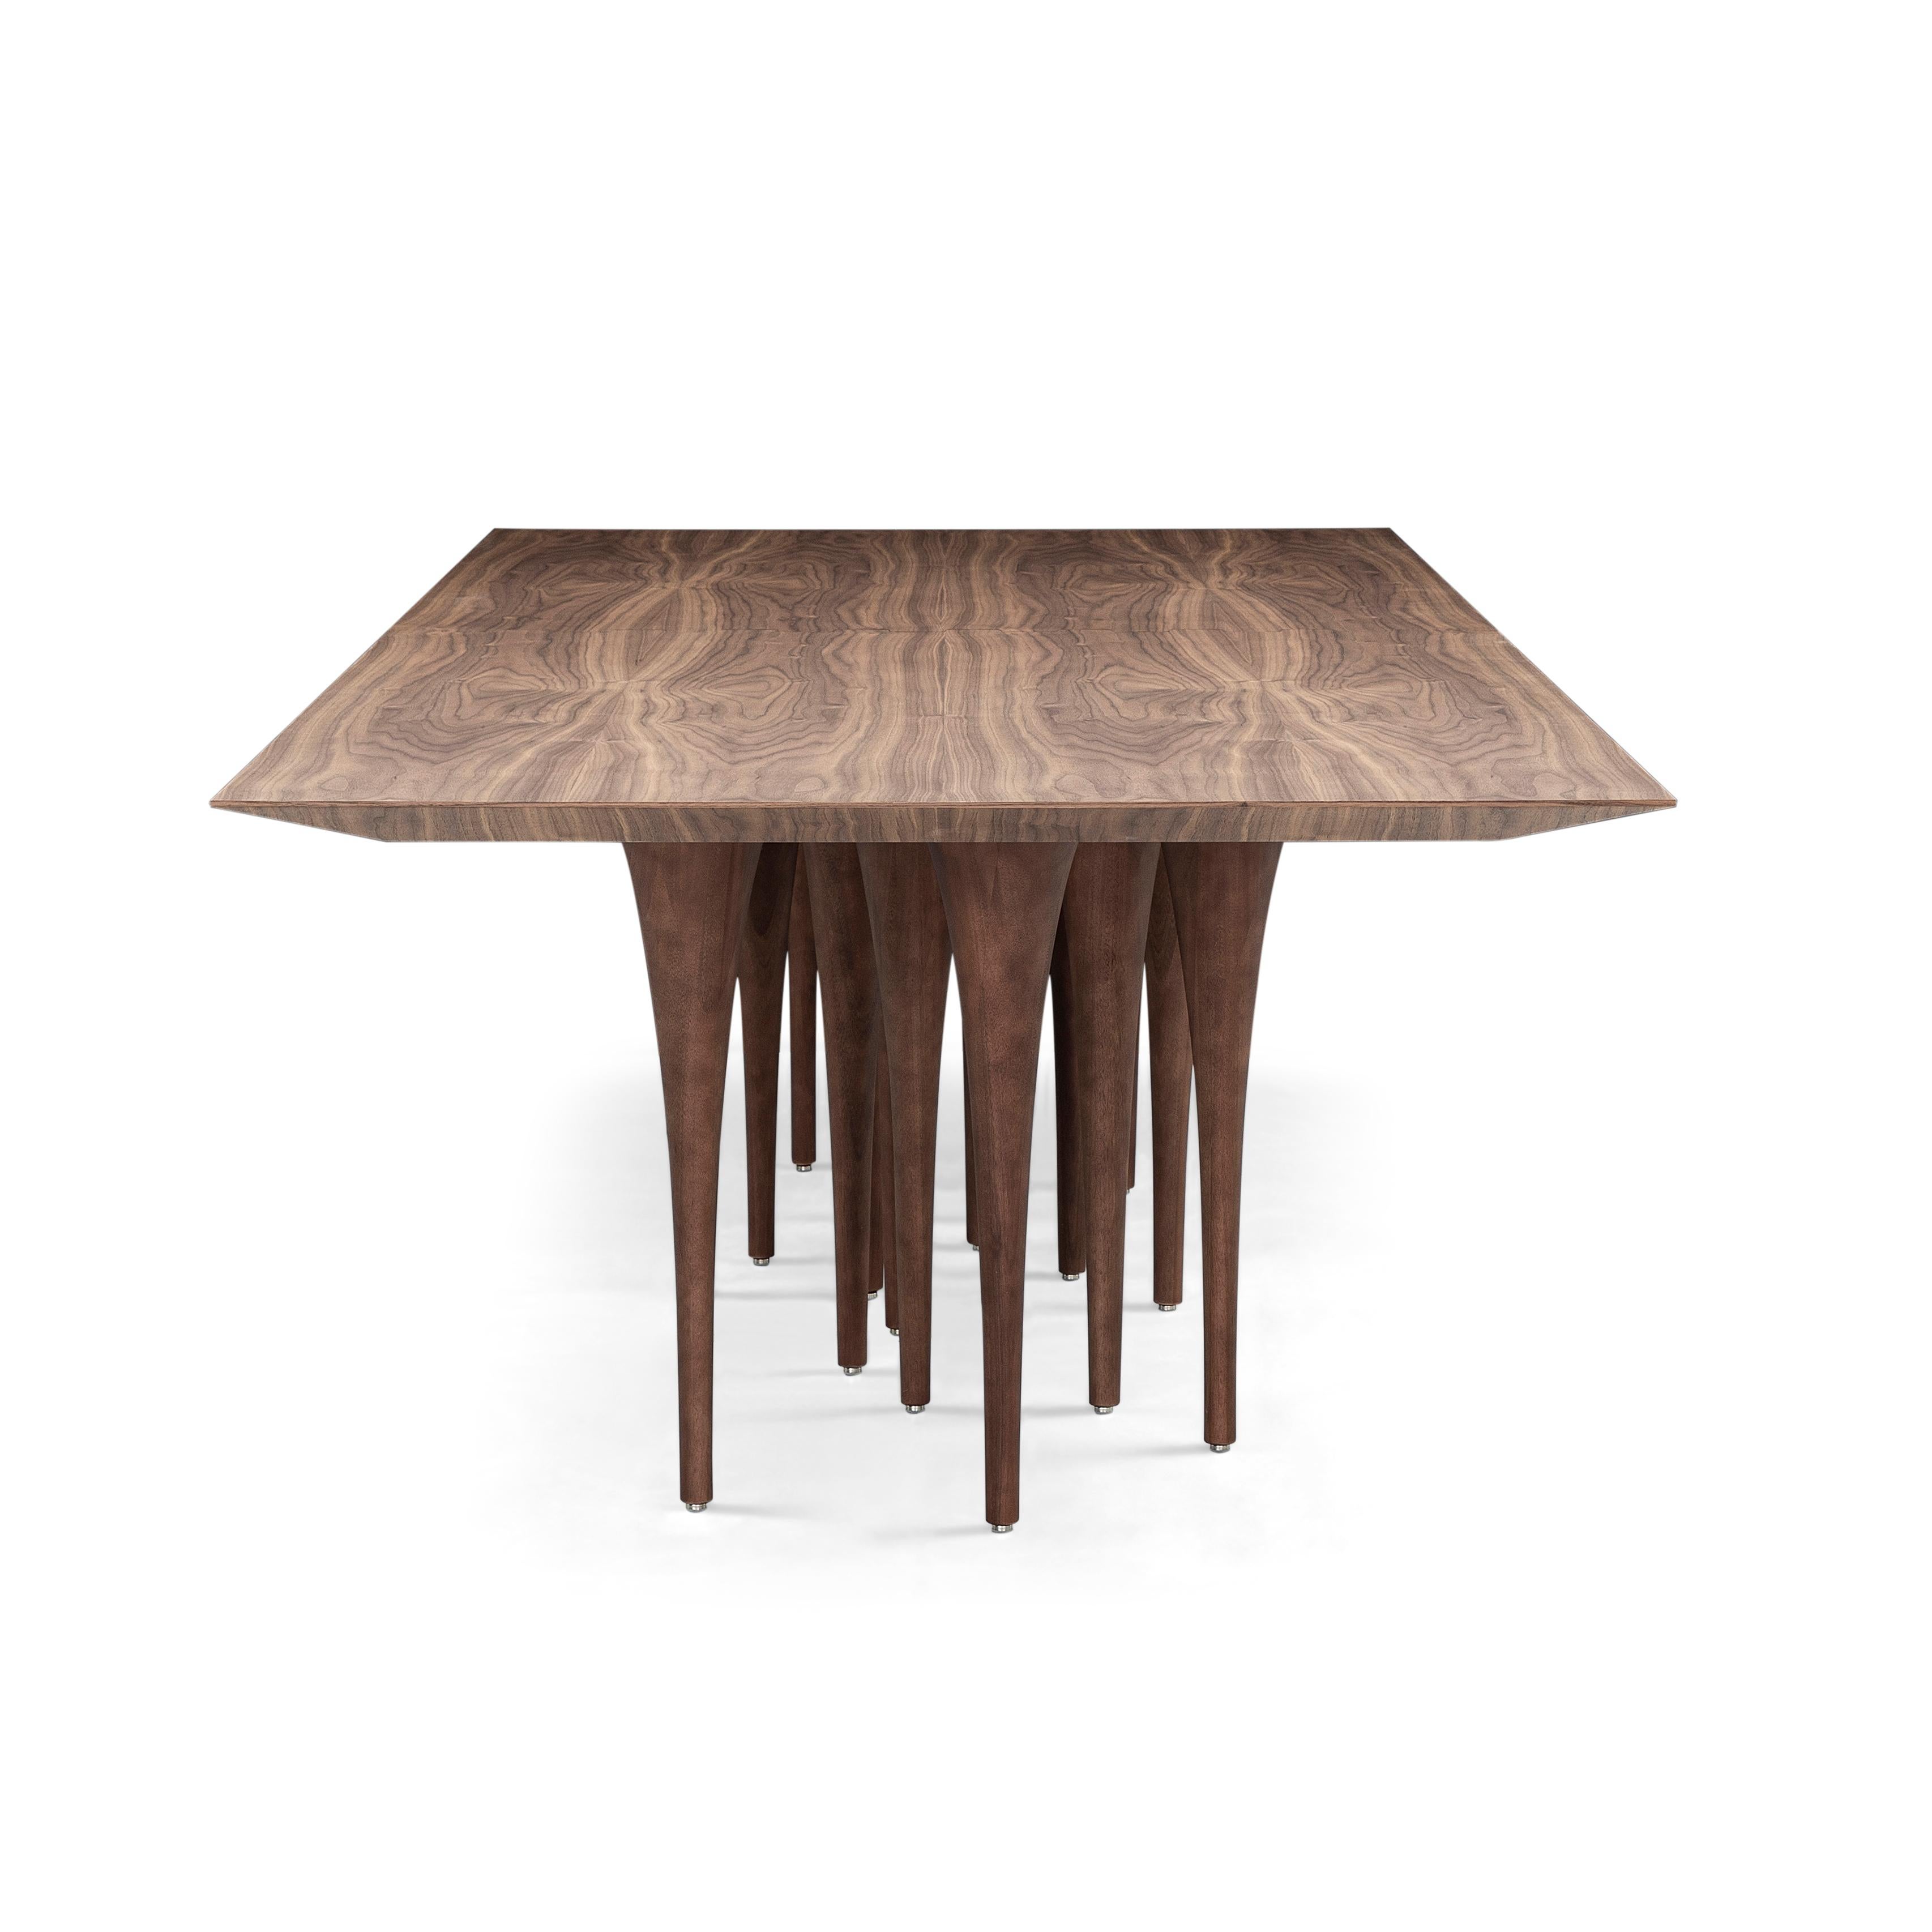 Contemporary Pin Dining Table with a Walnut Wood Veneered Table Top and 16 Legs 118'' For Sale